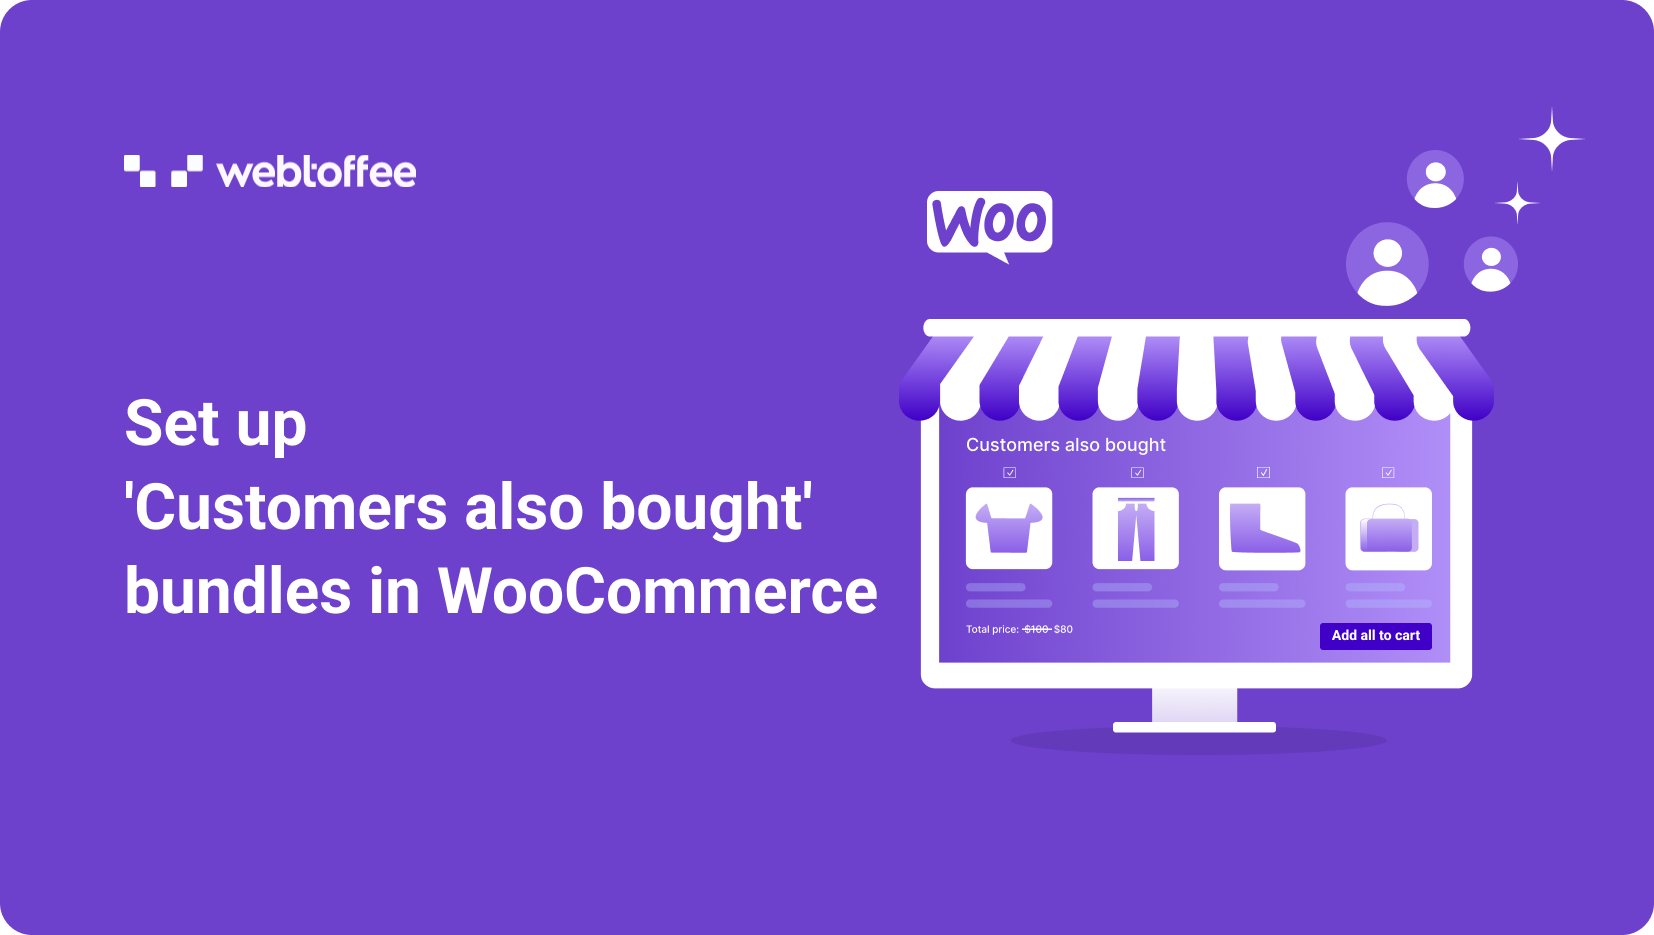 How to set up a ‘Customers also bought’ product bundle in WooCommerce stores?